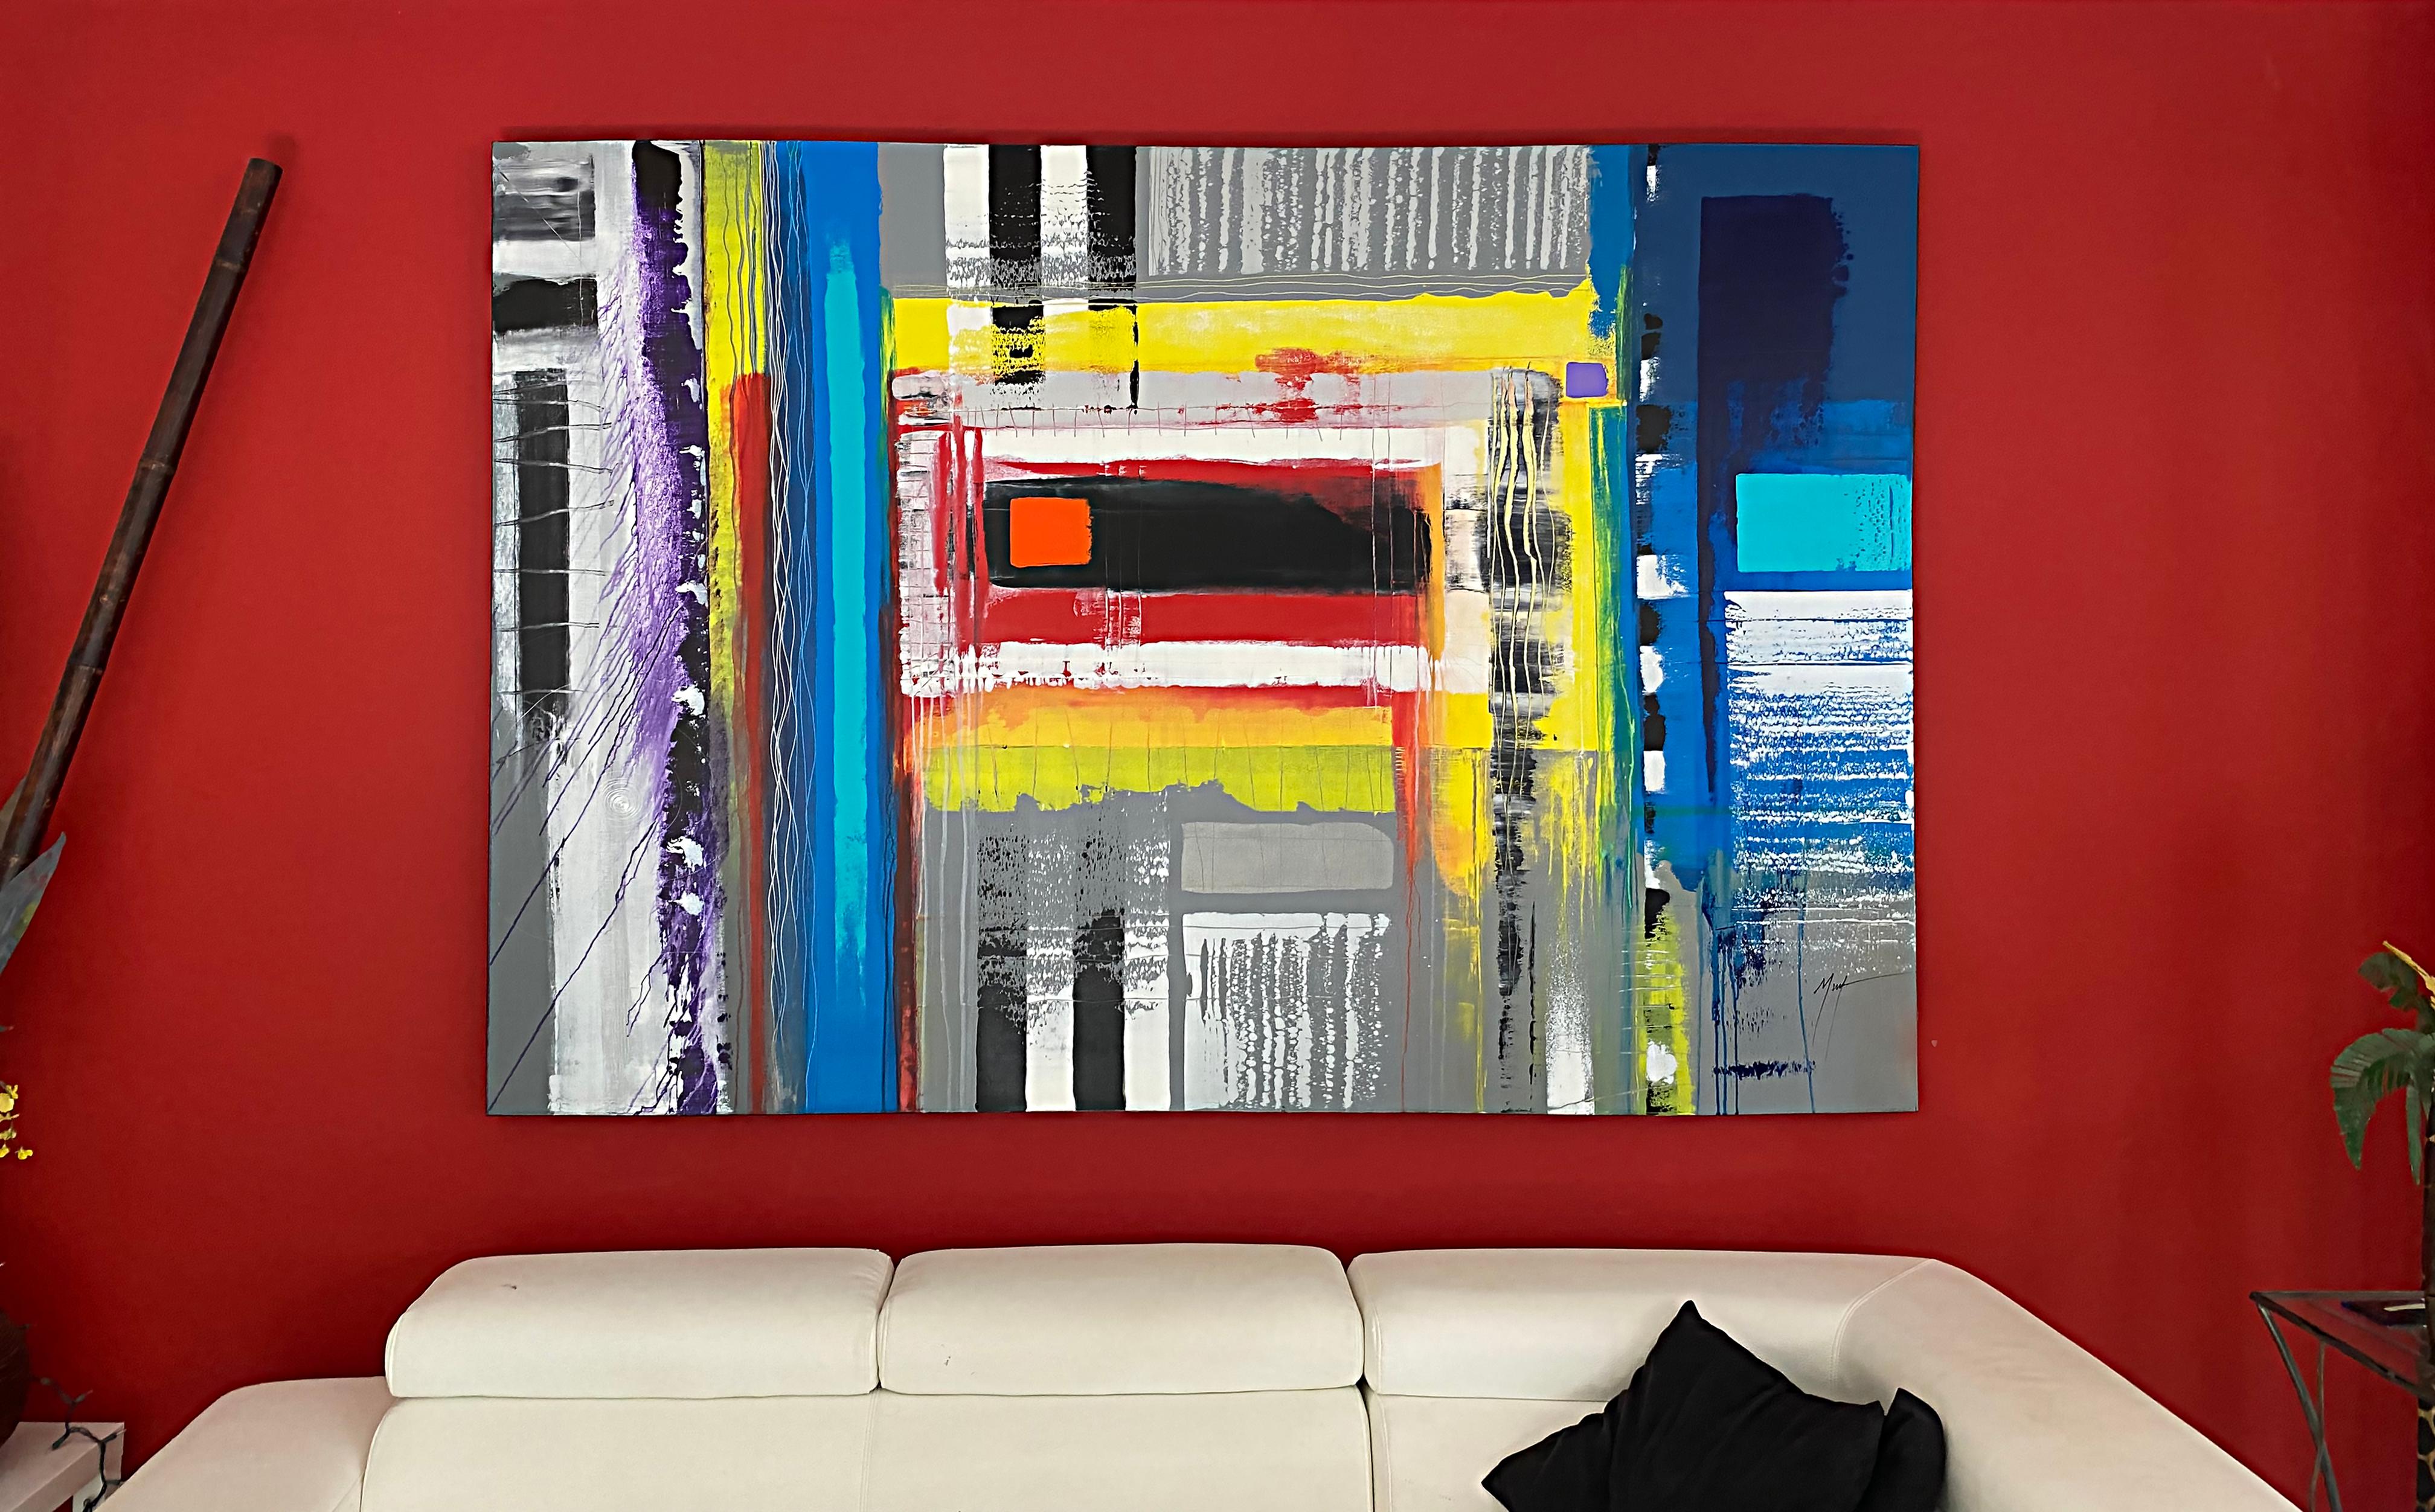 Murf Murphy Large Contemporary abstract painting on canvas


Offered for sale is a striking mixed-media painting by Marvin Murf Murphy. The artist has used bold coloring and brushwork to create an intriguing work with movement and interest. The